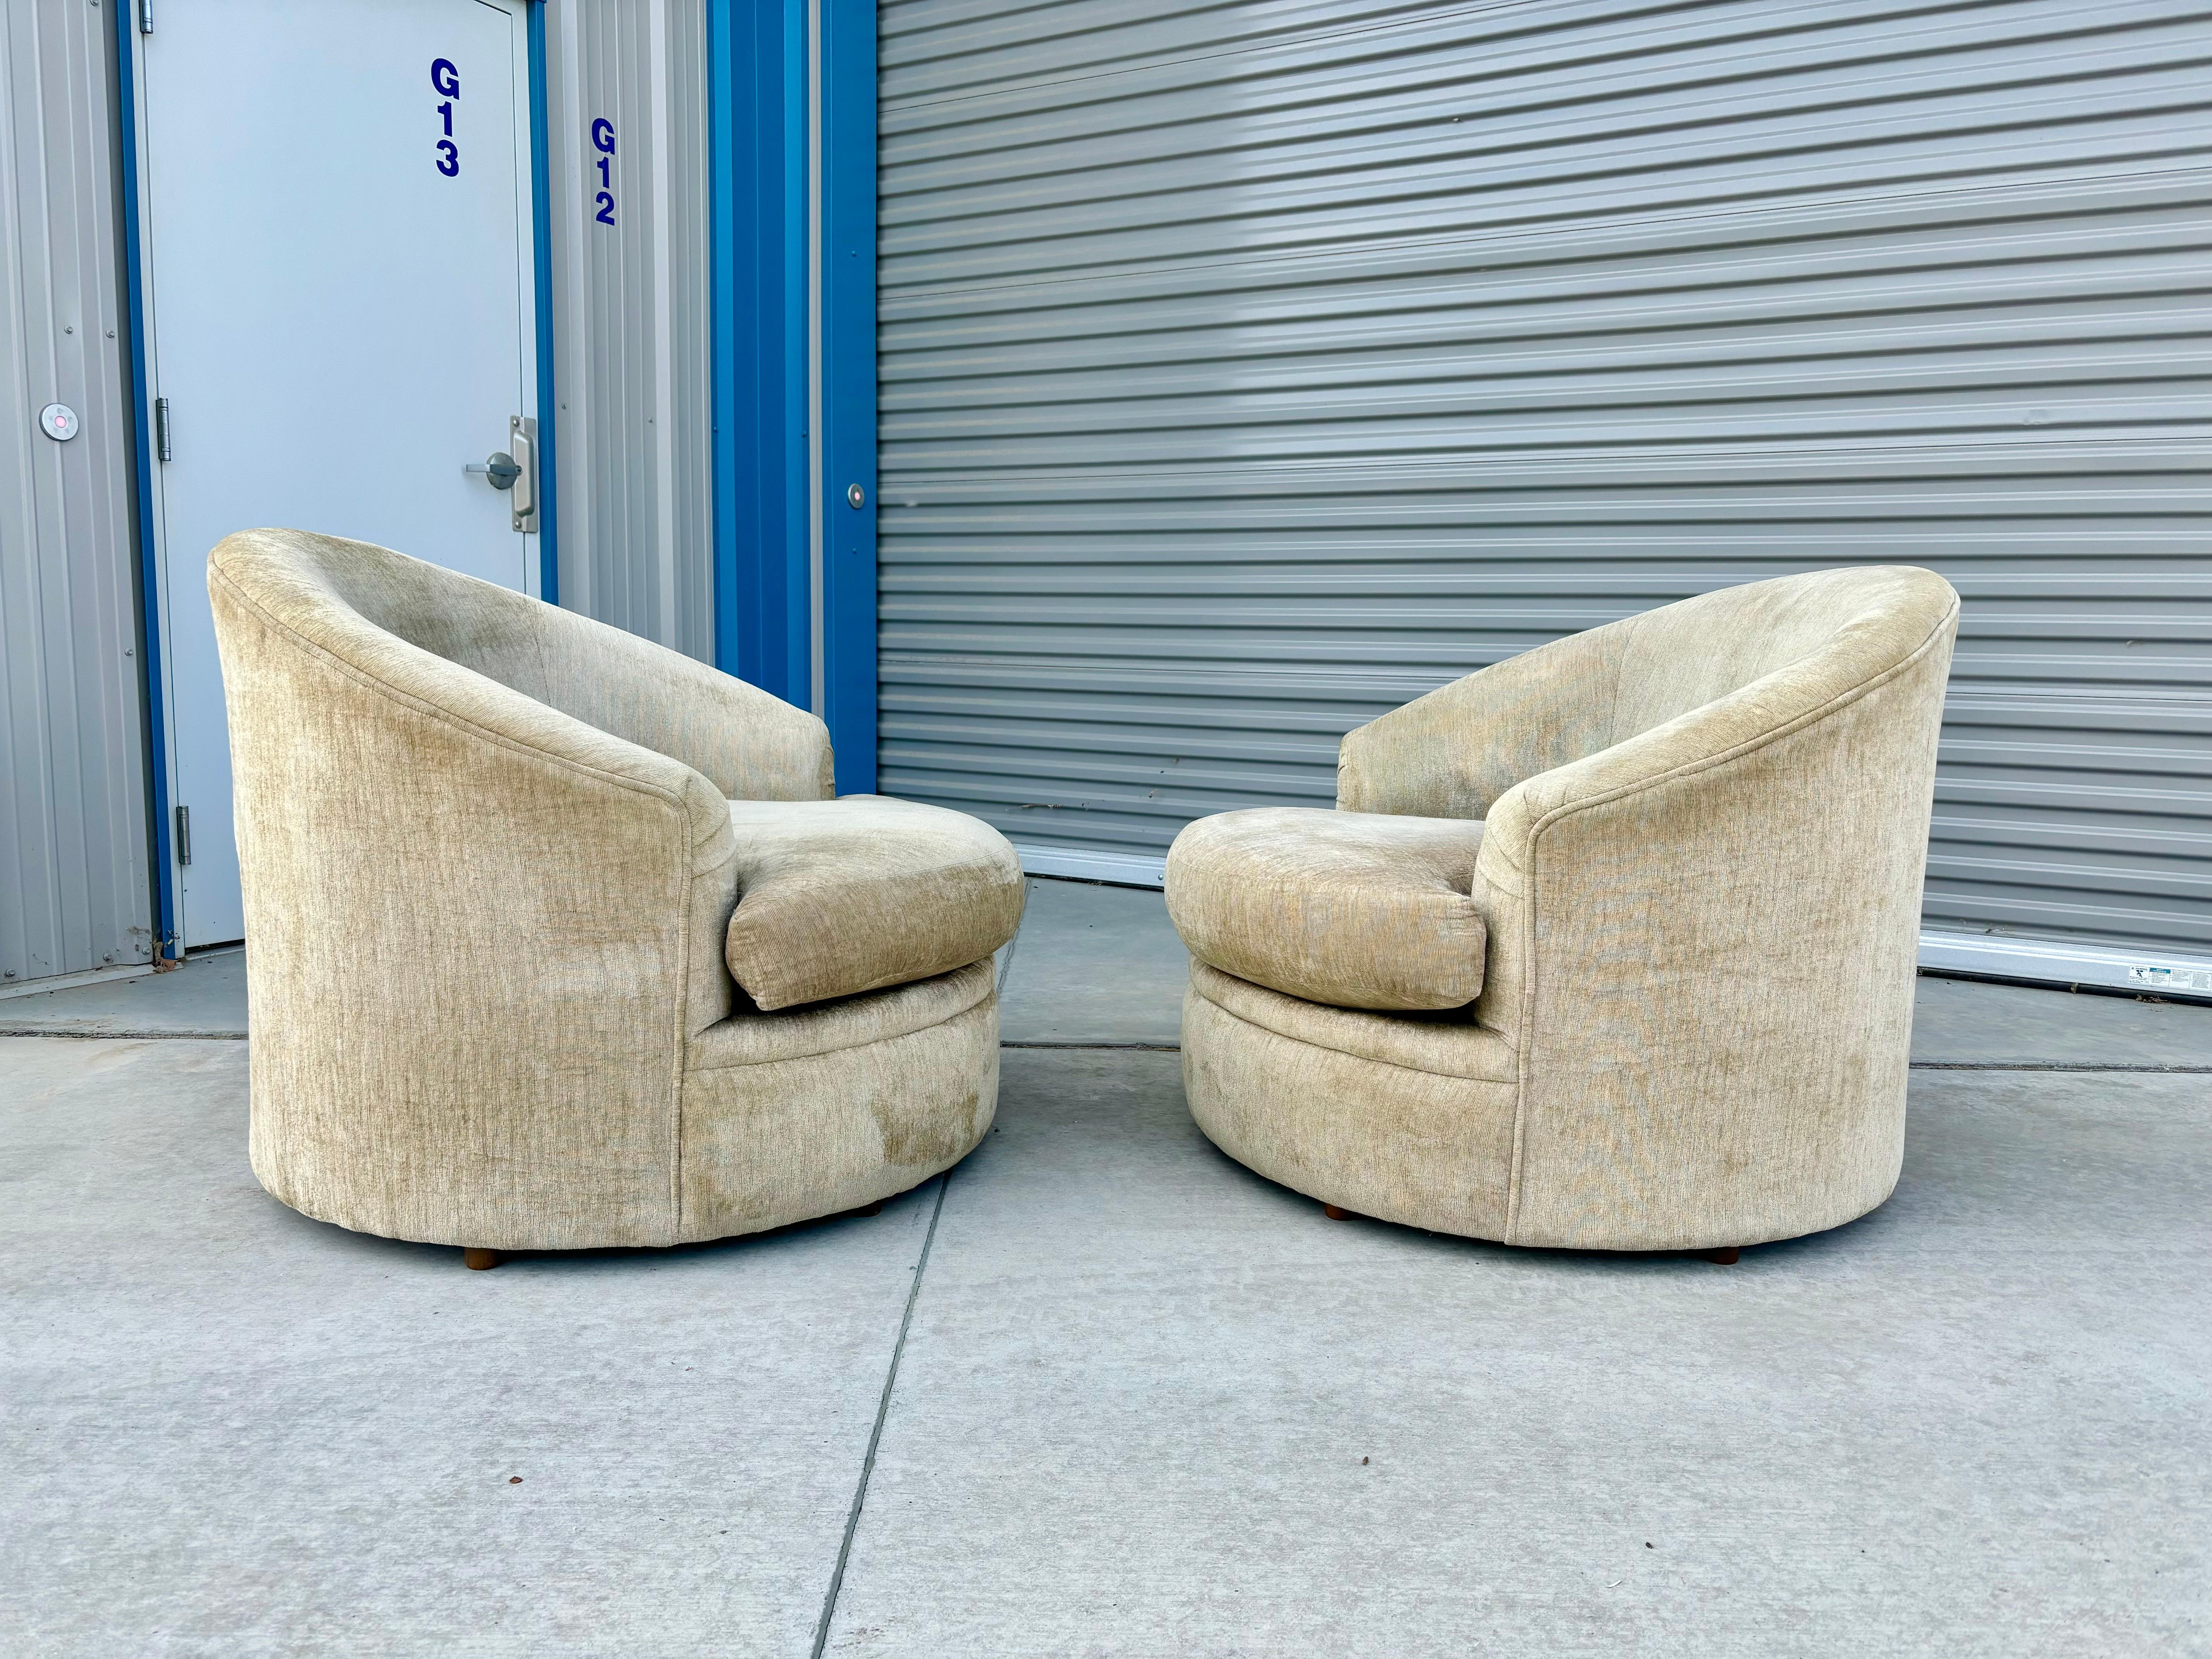 1970s Mid Century Modern Lounge Chairs - Set of 2 In Good Condition For Sale In North Hollywood, CA